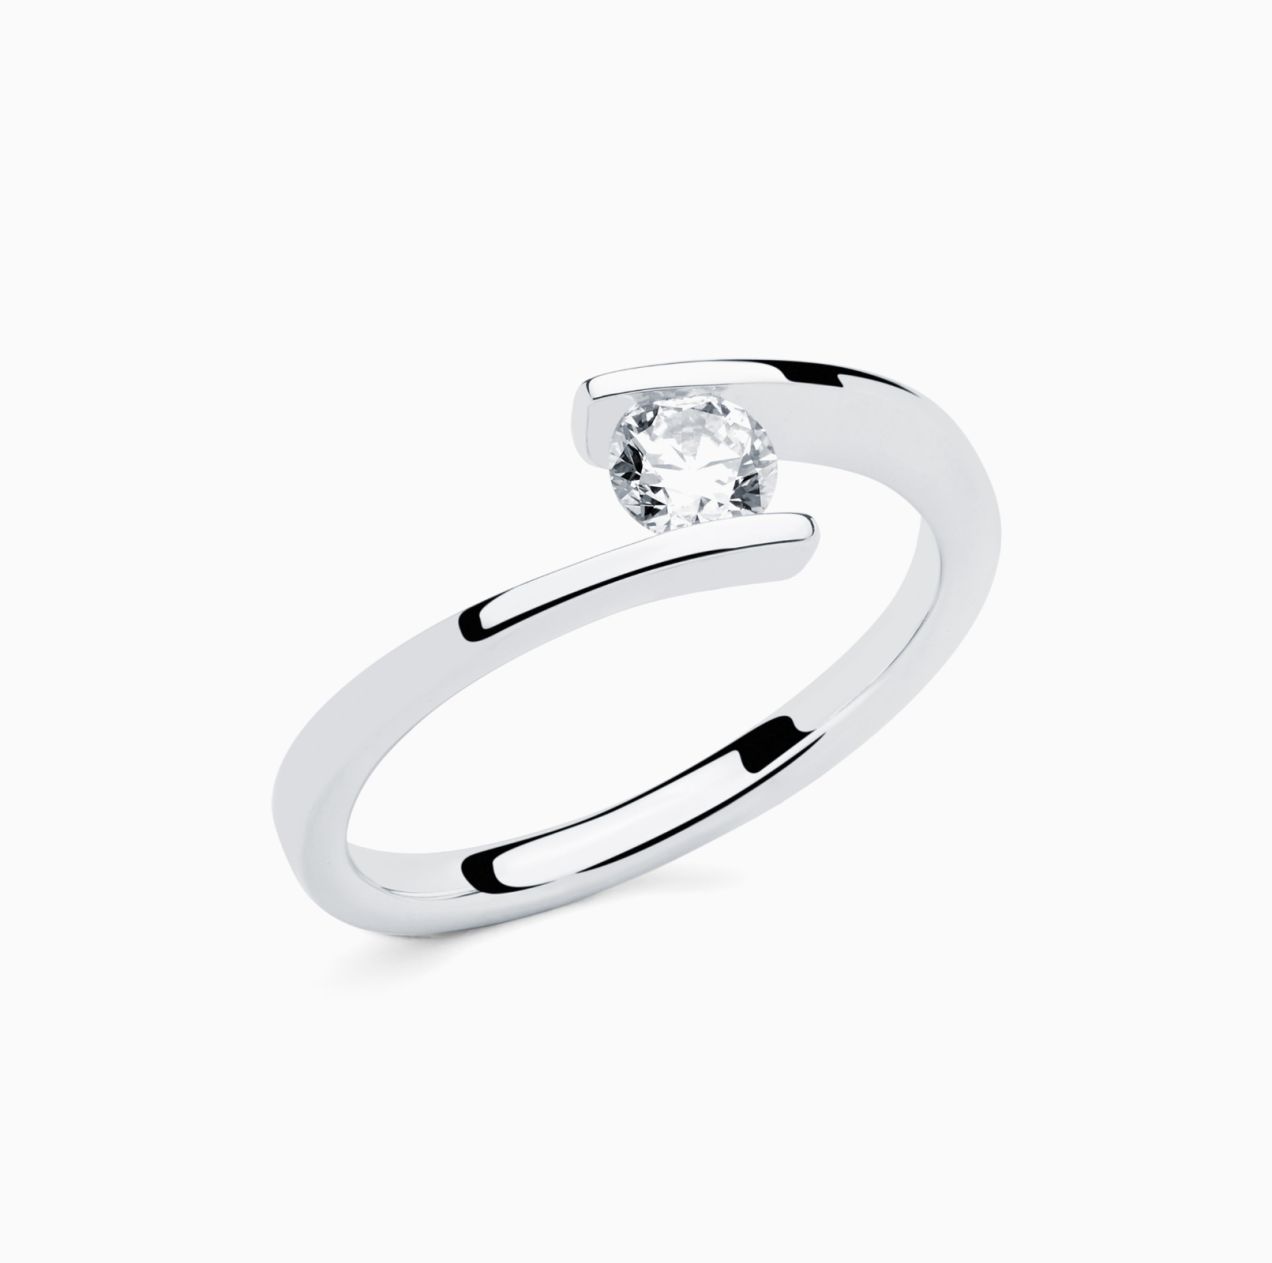 White gold with diamond in the center solitaire ring RABAT Bridge of Love